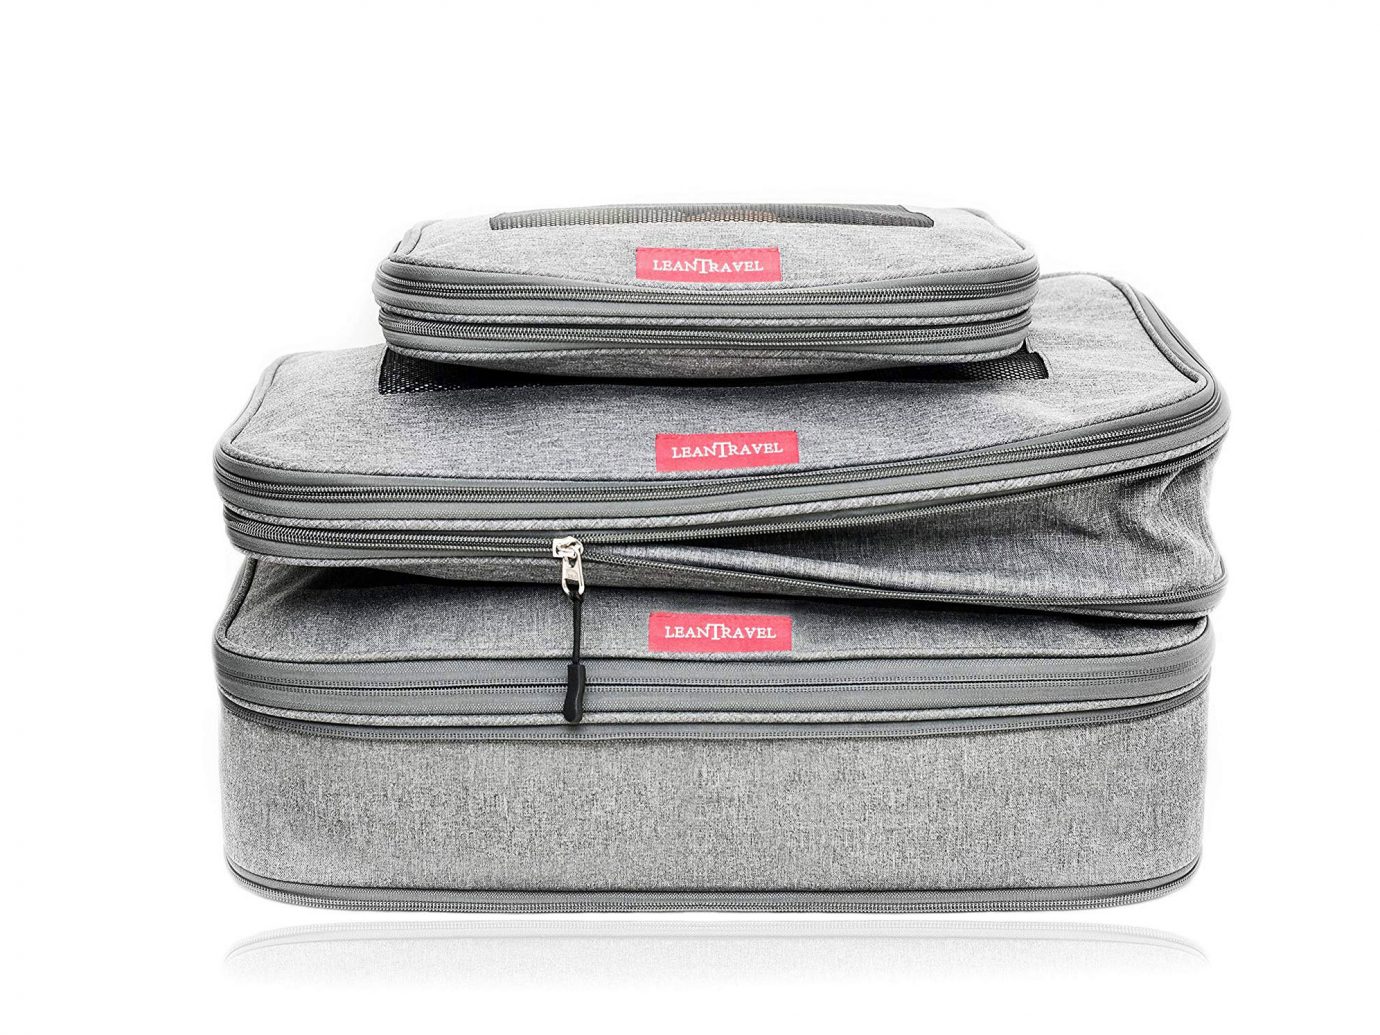 LeanTravel Compression Packing Cubes with Double Zipper (Set of 3)